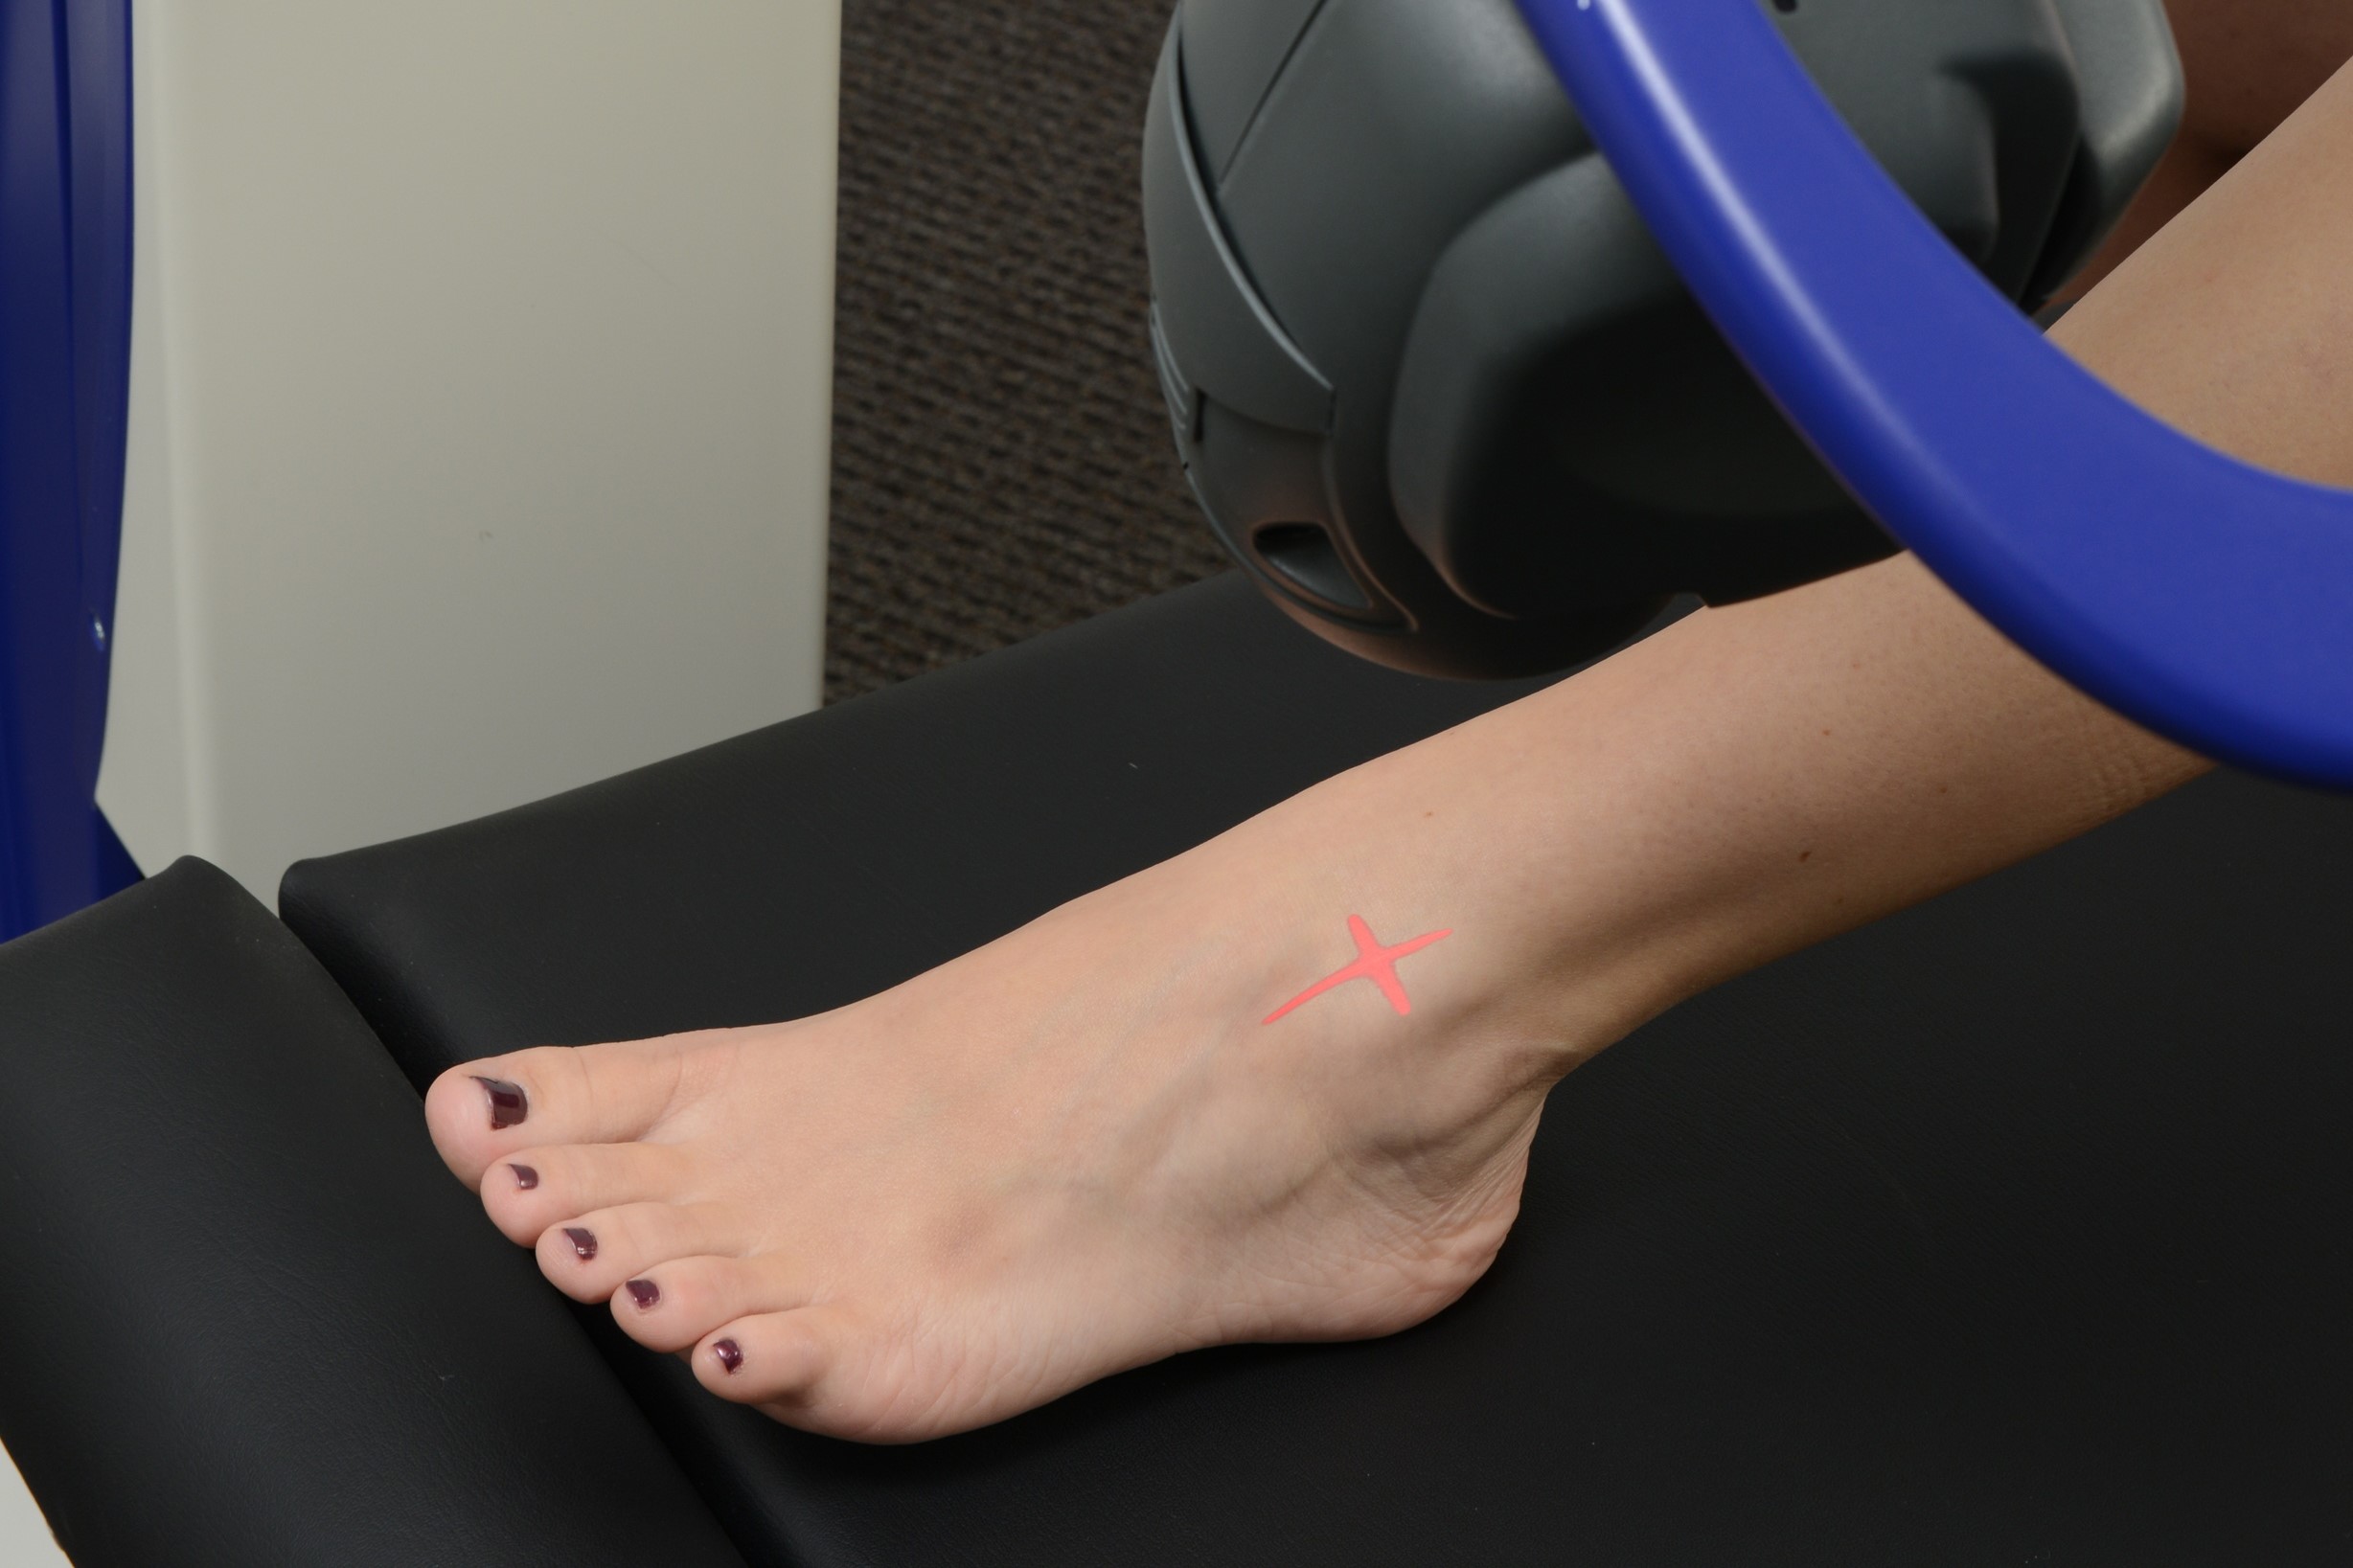 A woman's foot being treated with the M6 MLS Therapy Laser